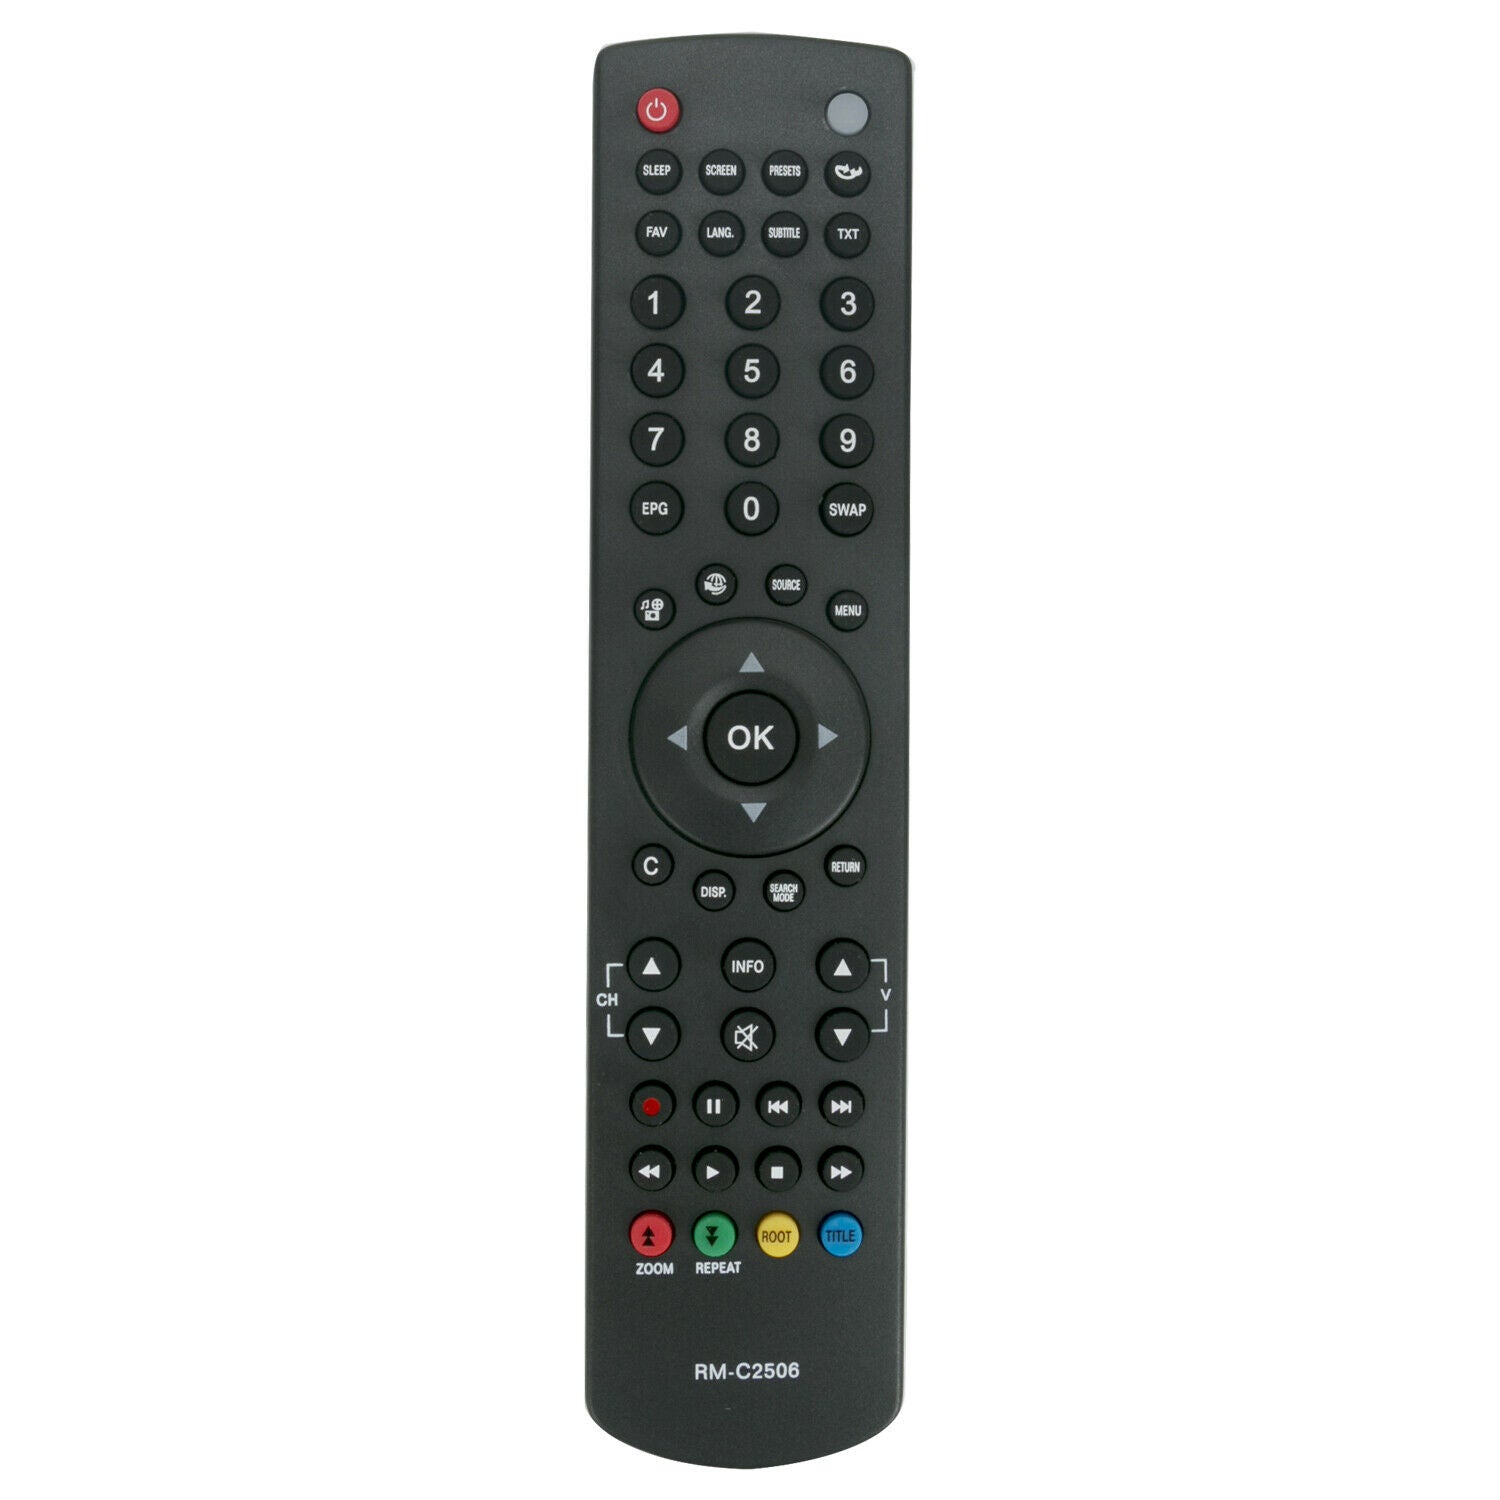 RM-C2506 Replacement Remote Control for JVC LT19DD30J